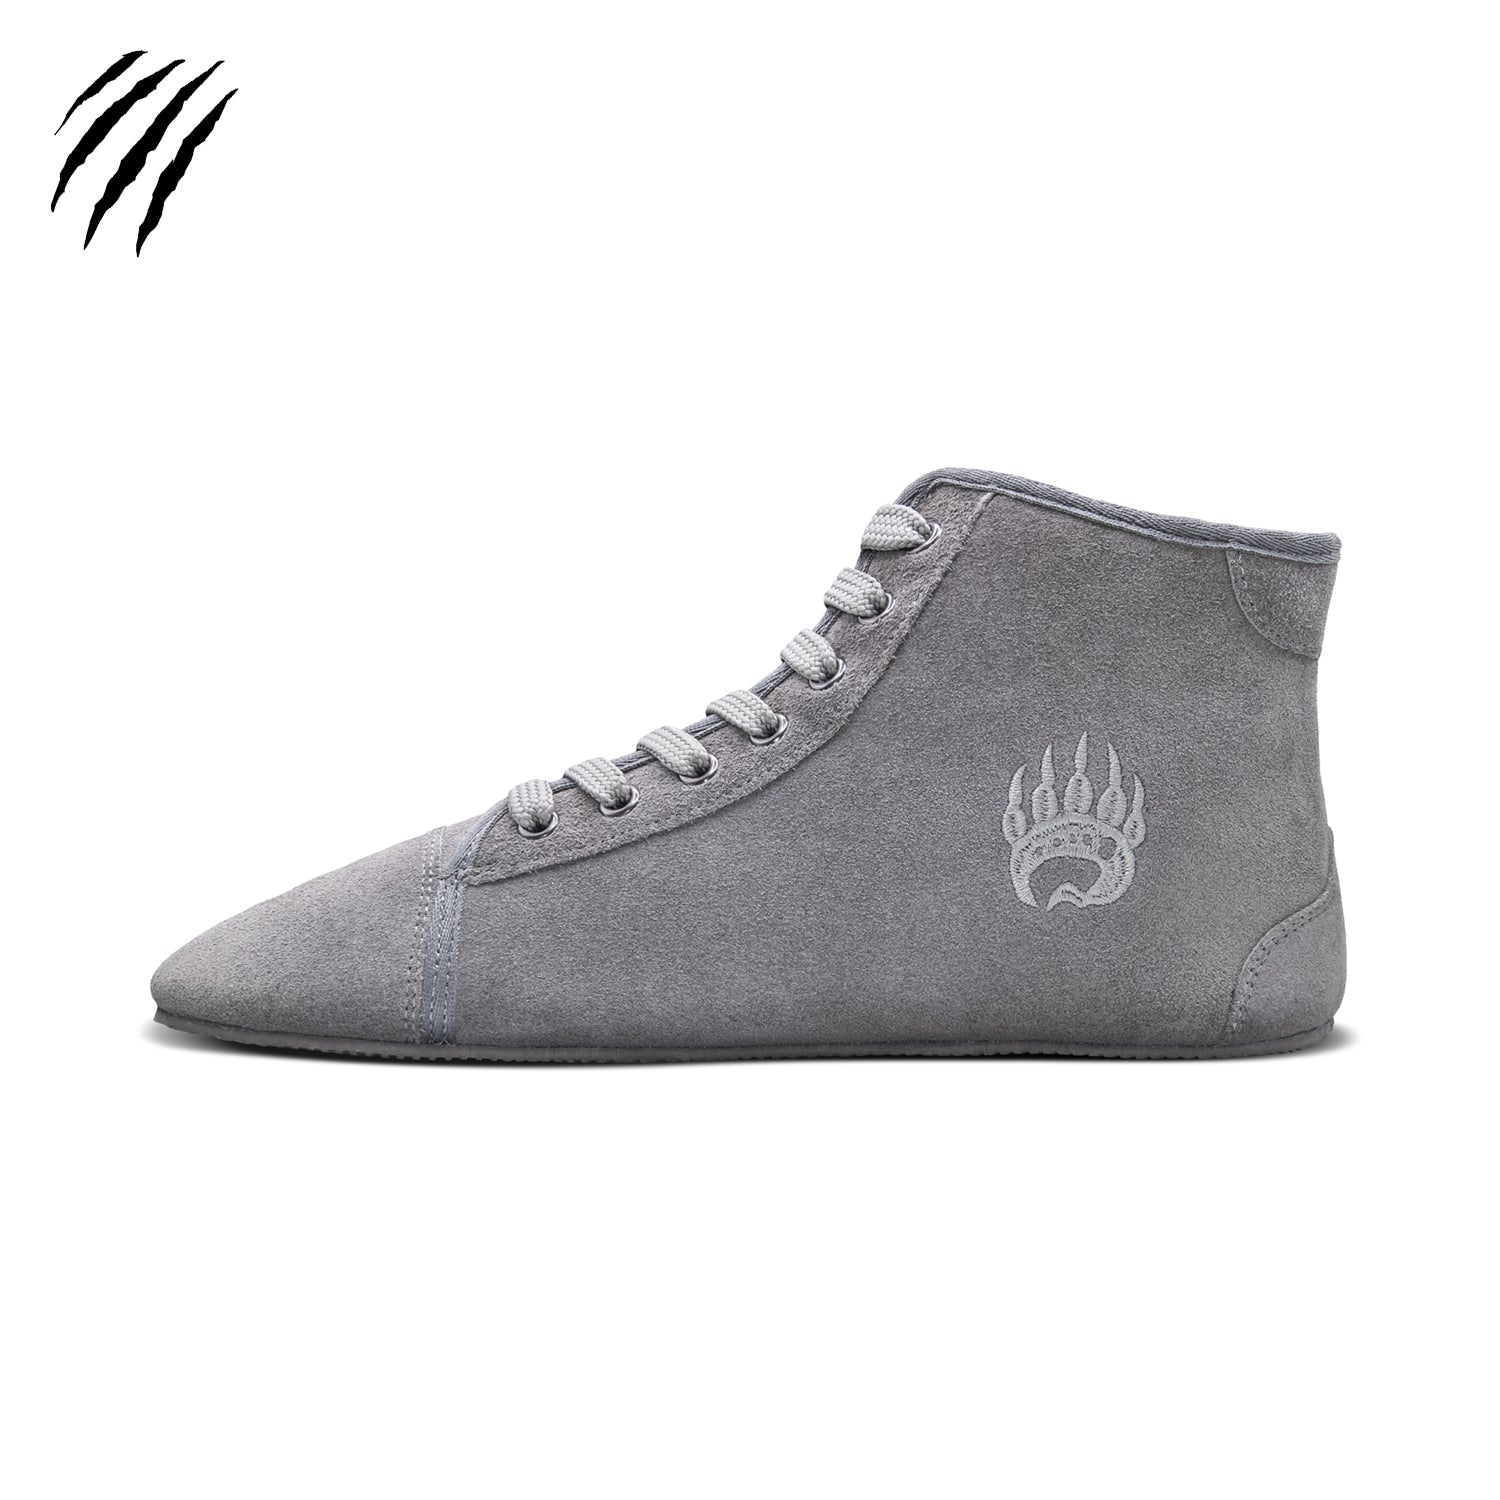 A single Bearfoot Ursus Suede High-Top Ice Grey sneaker with white laces and a bear paw logo on the side, displayed against a white background.